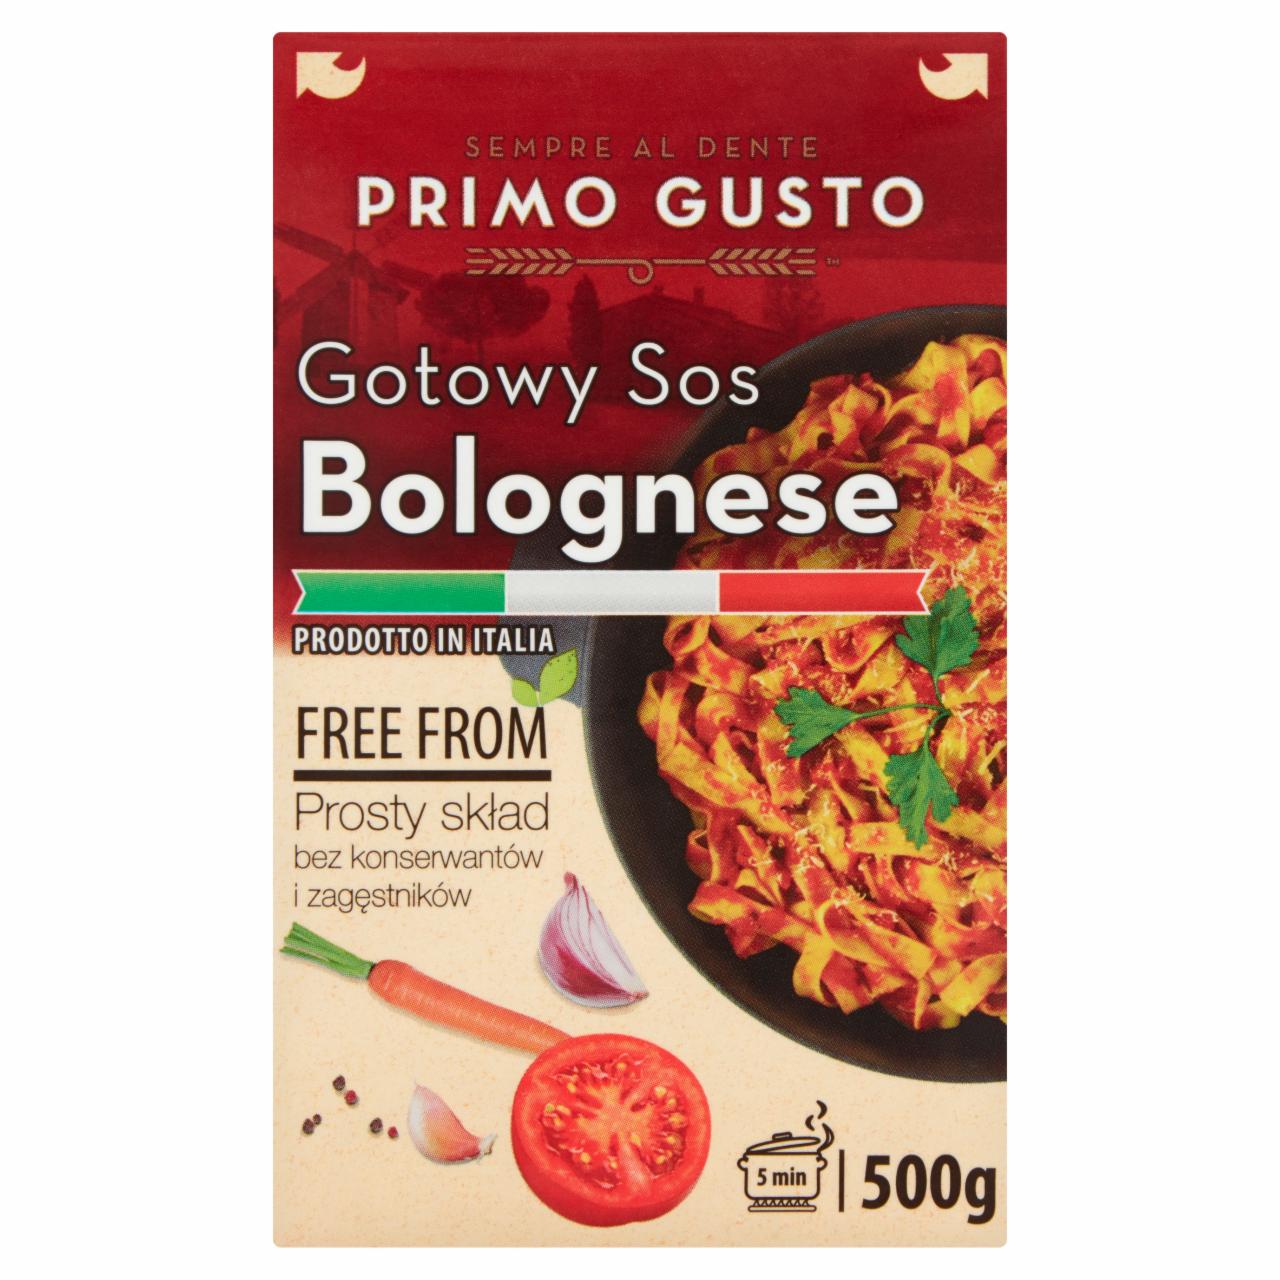 Zdjęcia - Primo Gusto Free From Gotowy sos Bolognese 500 g